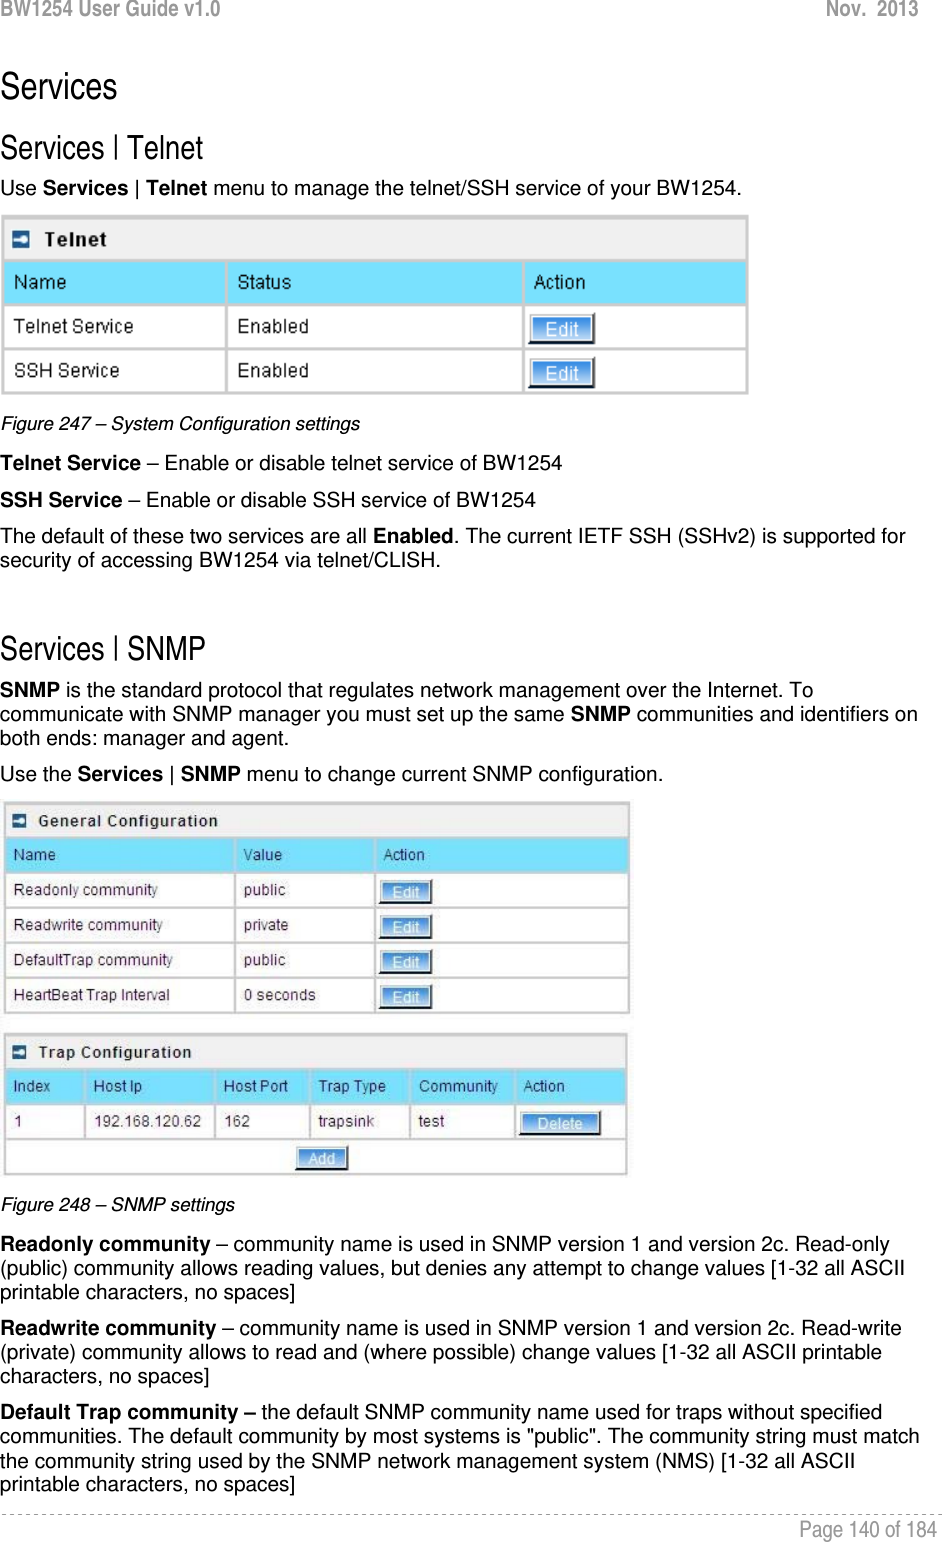 BW1254 User Guide v1.0  Nov.  2013     Page 140 of 184   Services Services | Telnet Use Services | Telnet menu to manage the telnet/SSH service of your BW1254.   Figure 247 – System Configuration settings Telnet Service – Enable or disable telnet service of BW1254 SSH Service – Enable or disable SSH service of BW1254 The default of these two services are all Enabled. The current IETF SSH (SSHv2) is supported for security of accessing BW1254 via telnet/CLISH.   Services | SNMP SNMP is the standard protocol that regulates network management over the Internet. To communicate with SNMP manager you must set up the same SNMP communities and identifiers on both ends: manager and agent. Use the Services | SNMP menu to change current SNMP configuration.  Figure 248 – SNMP settings Readonly community – community name is used in SNMP version 1 and version 2c. Read-only (public) community allows reading values, but denies any attempt to change values [1-32 all ASCII printable characters, no spaces] Readwrite community – community name is used in SNMP version 1 and version 2c. Read-write (private) community allows to read and (where possible) change values [1-32 all ASCII printable characters, no spaces] Default Trap community – the default SNMP community name used for traps without specified communities. The default community by most systems is &quot;public&quot;. The community string must match the community string used by the SNMP network management system (NMS) [1-32 all ASCII printable characters, no spaces] 